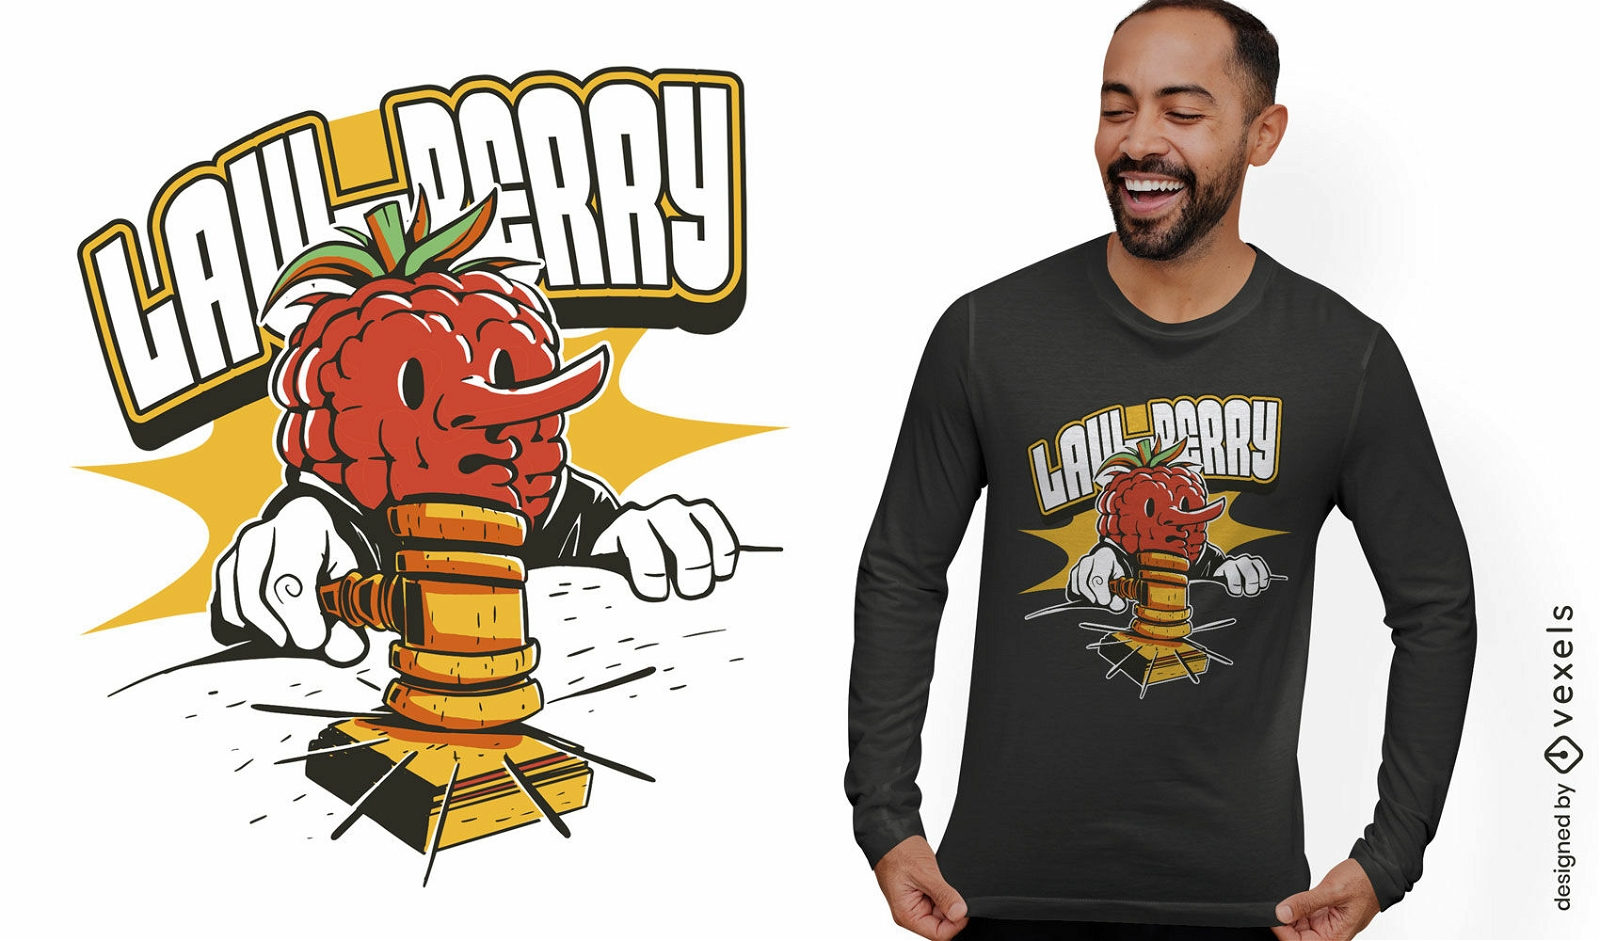 Law berry funny t-shirt design